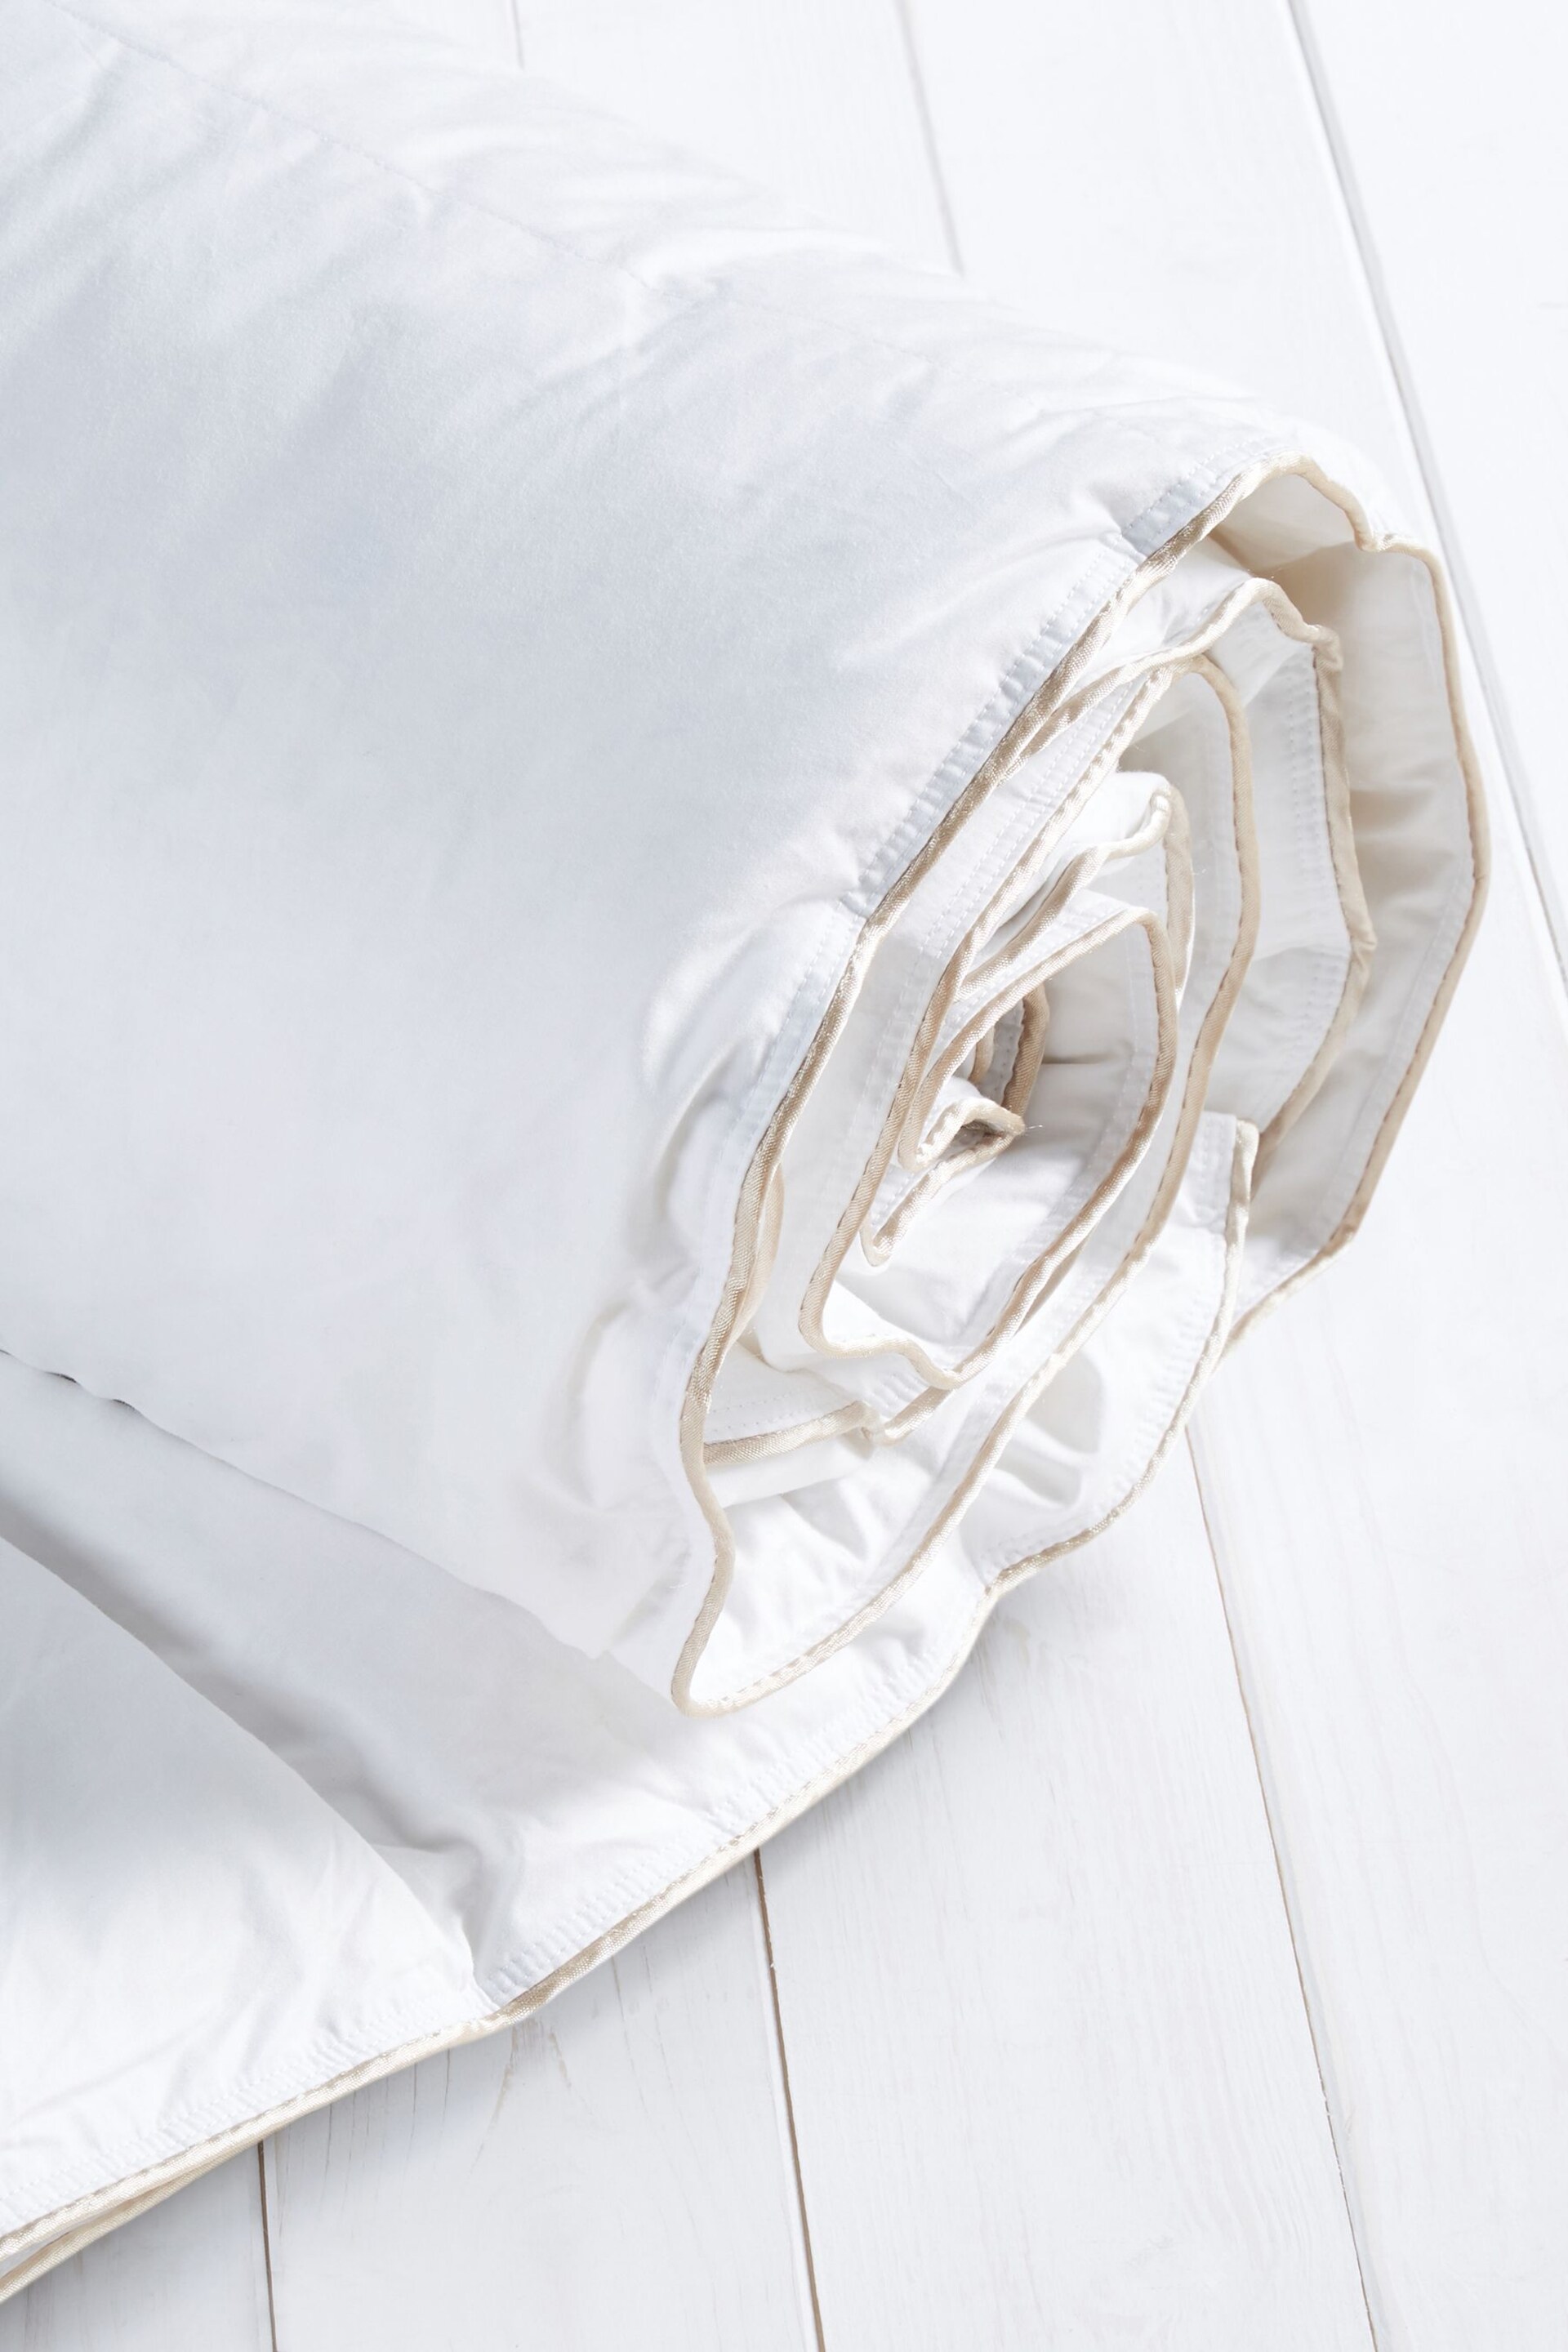 Goose Feather & Down 13.5 Tog All Season Duvet - Image 1 of 4